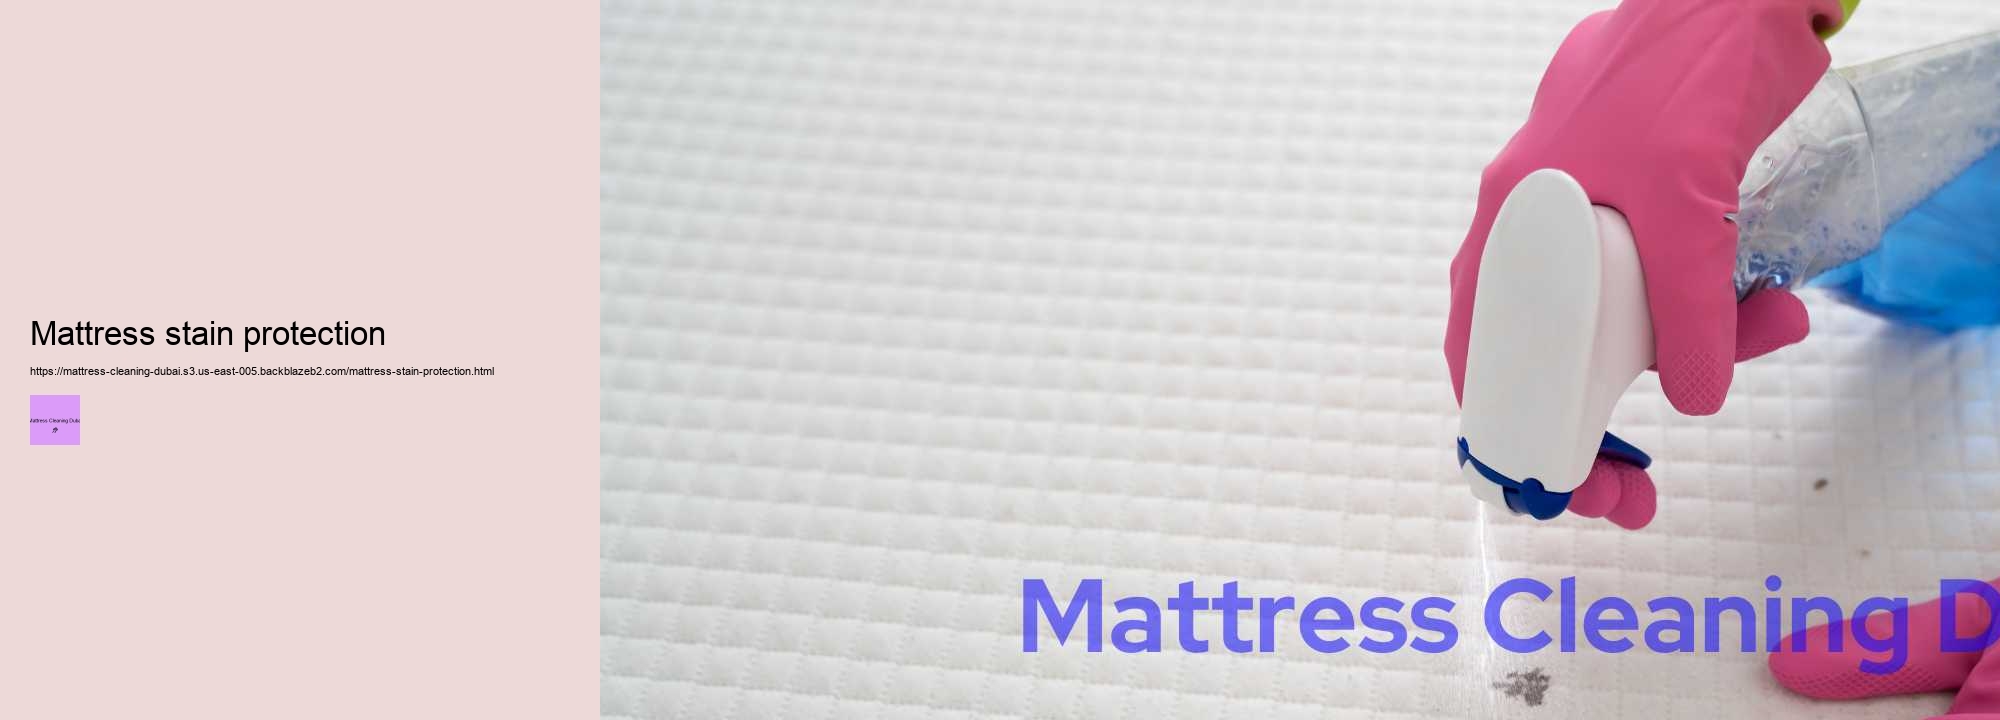 Mattress stain protection